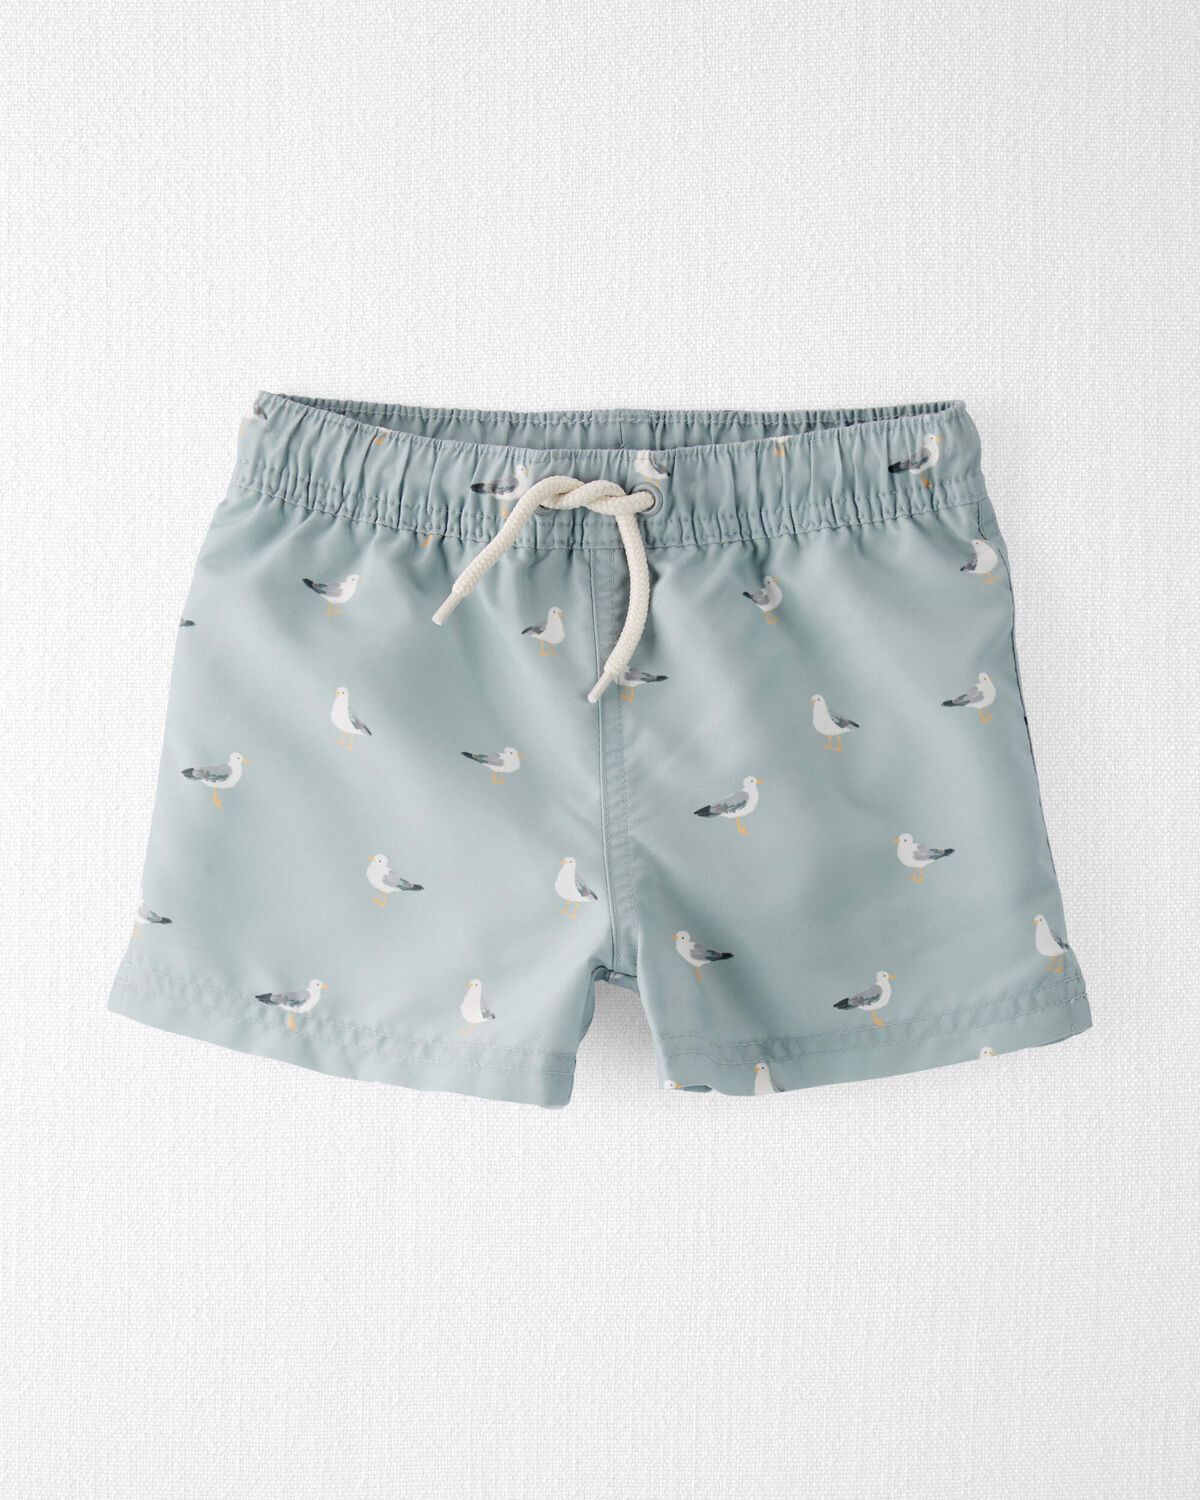 Seagull Print Toddler Recycled Swim Trunks | carters.com | Carter's